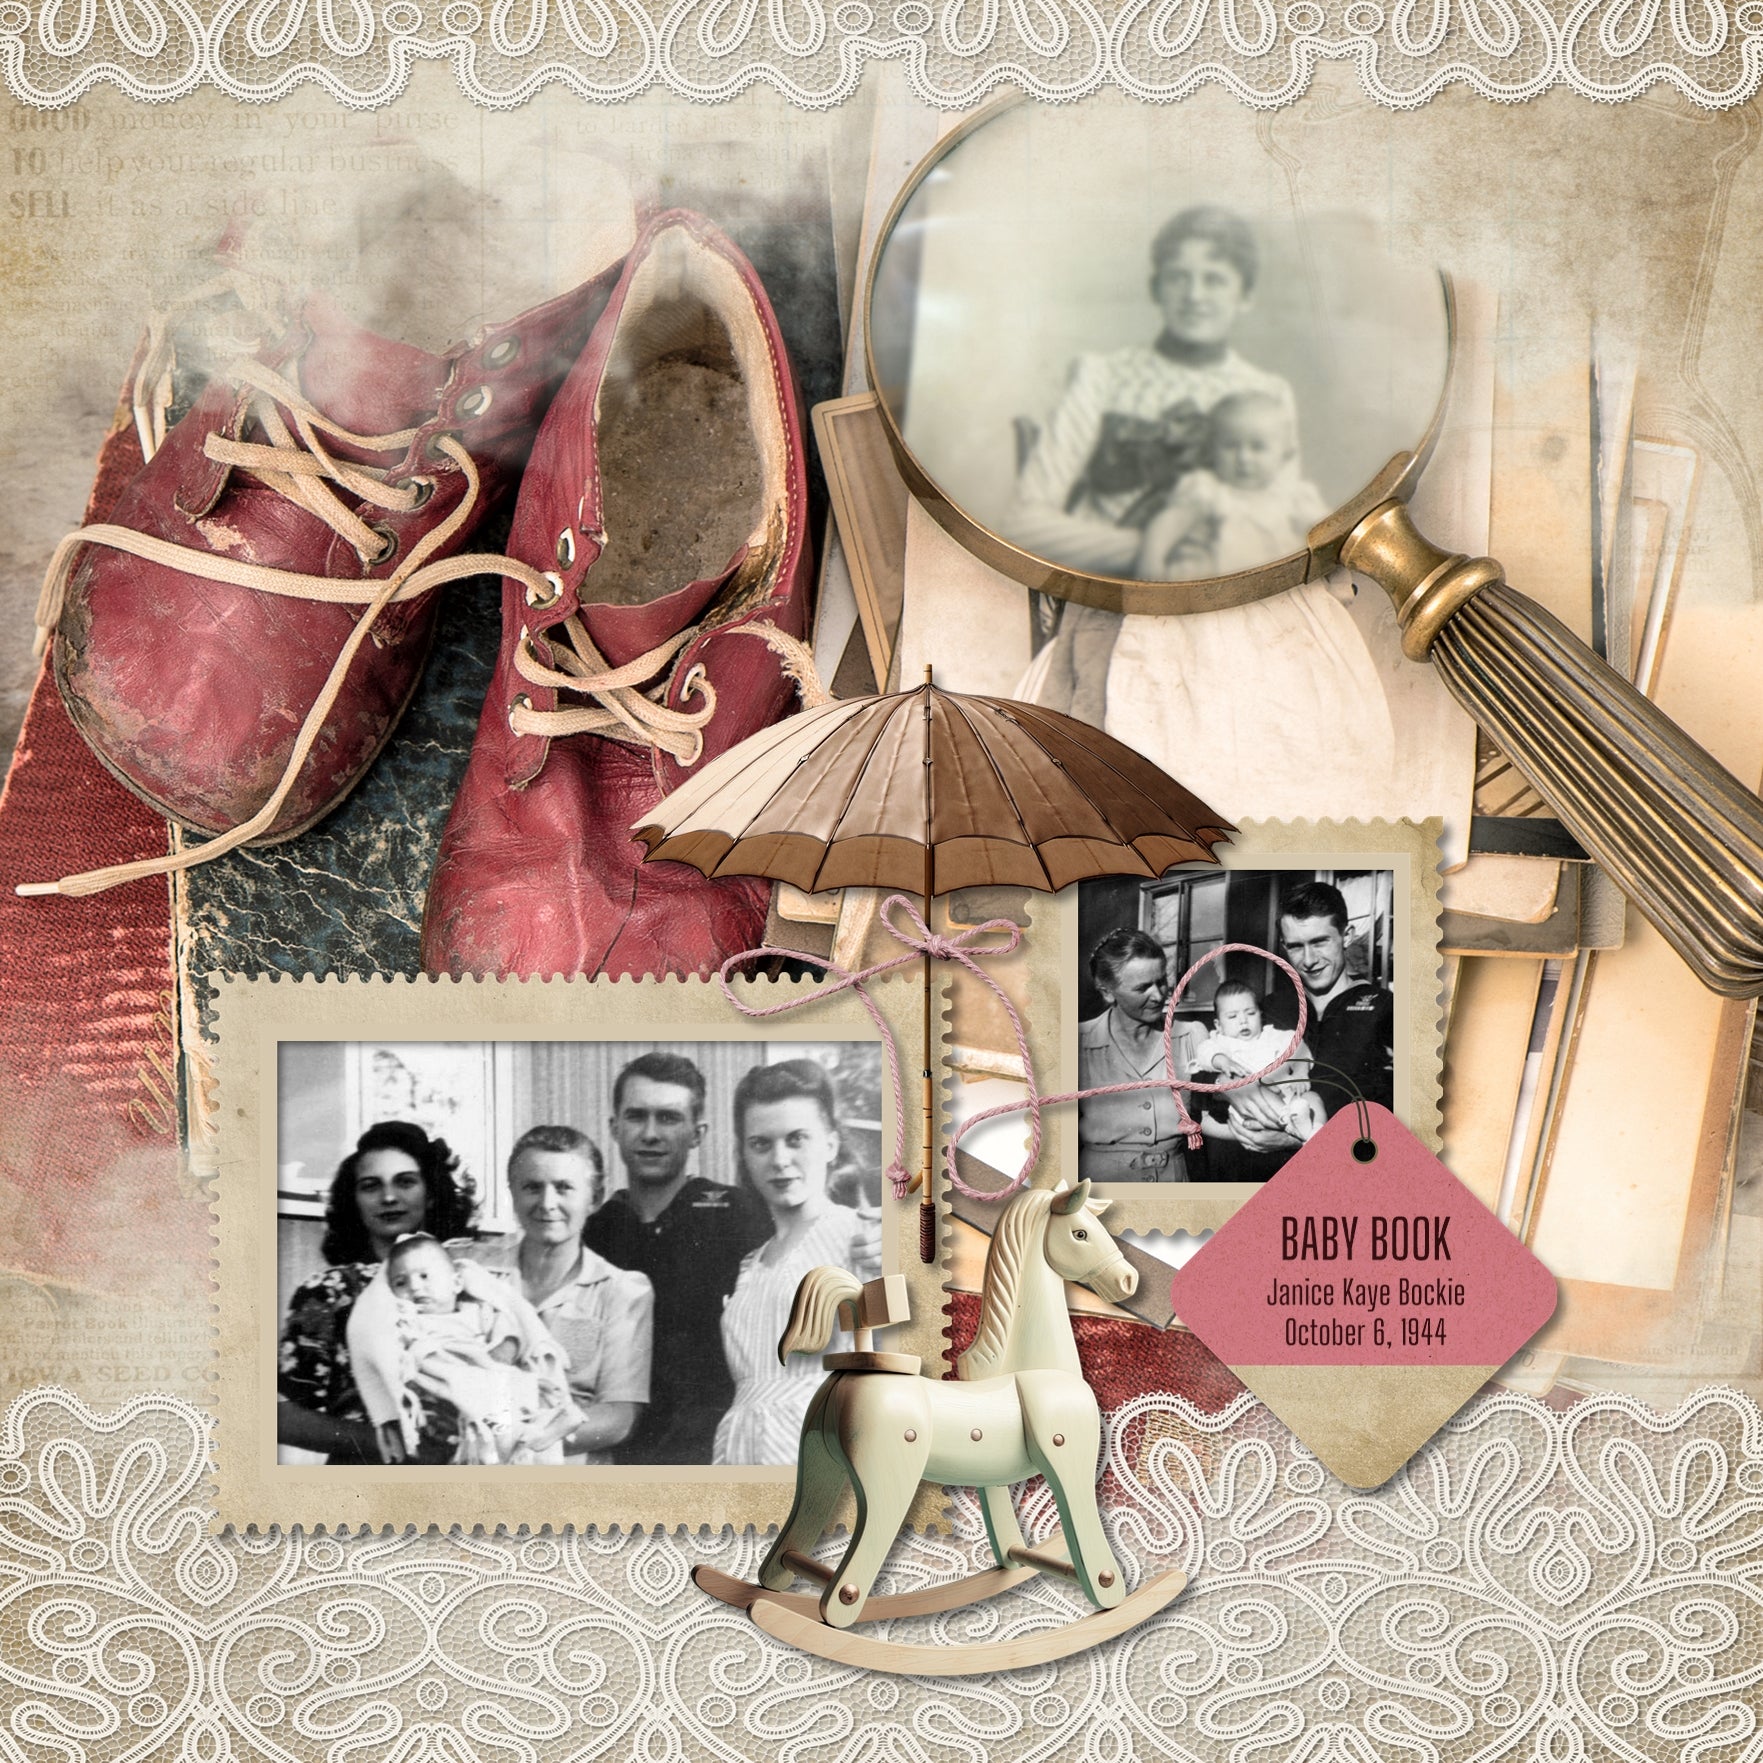 Great for genealogy and family history albums and keepsake digital art pages, these masked photo overlays by Lucky Girl Creative digital art are perfect for layering with your antique photographs to give that realistic vintage look. With transparent edges, these masked photographs blend seamlessly into any background paper and make the perfect backdrop to showcase your treasured finds from a flea market, vintage market, rummage or garage sale.